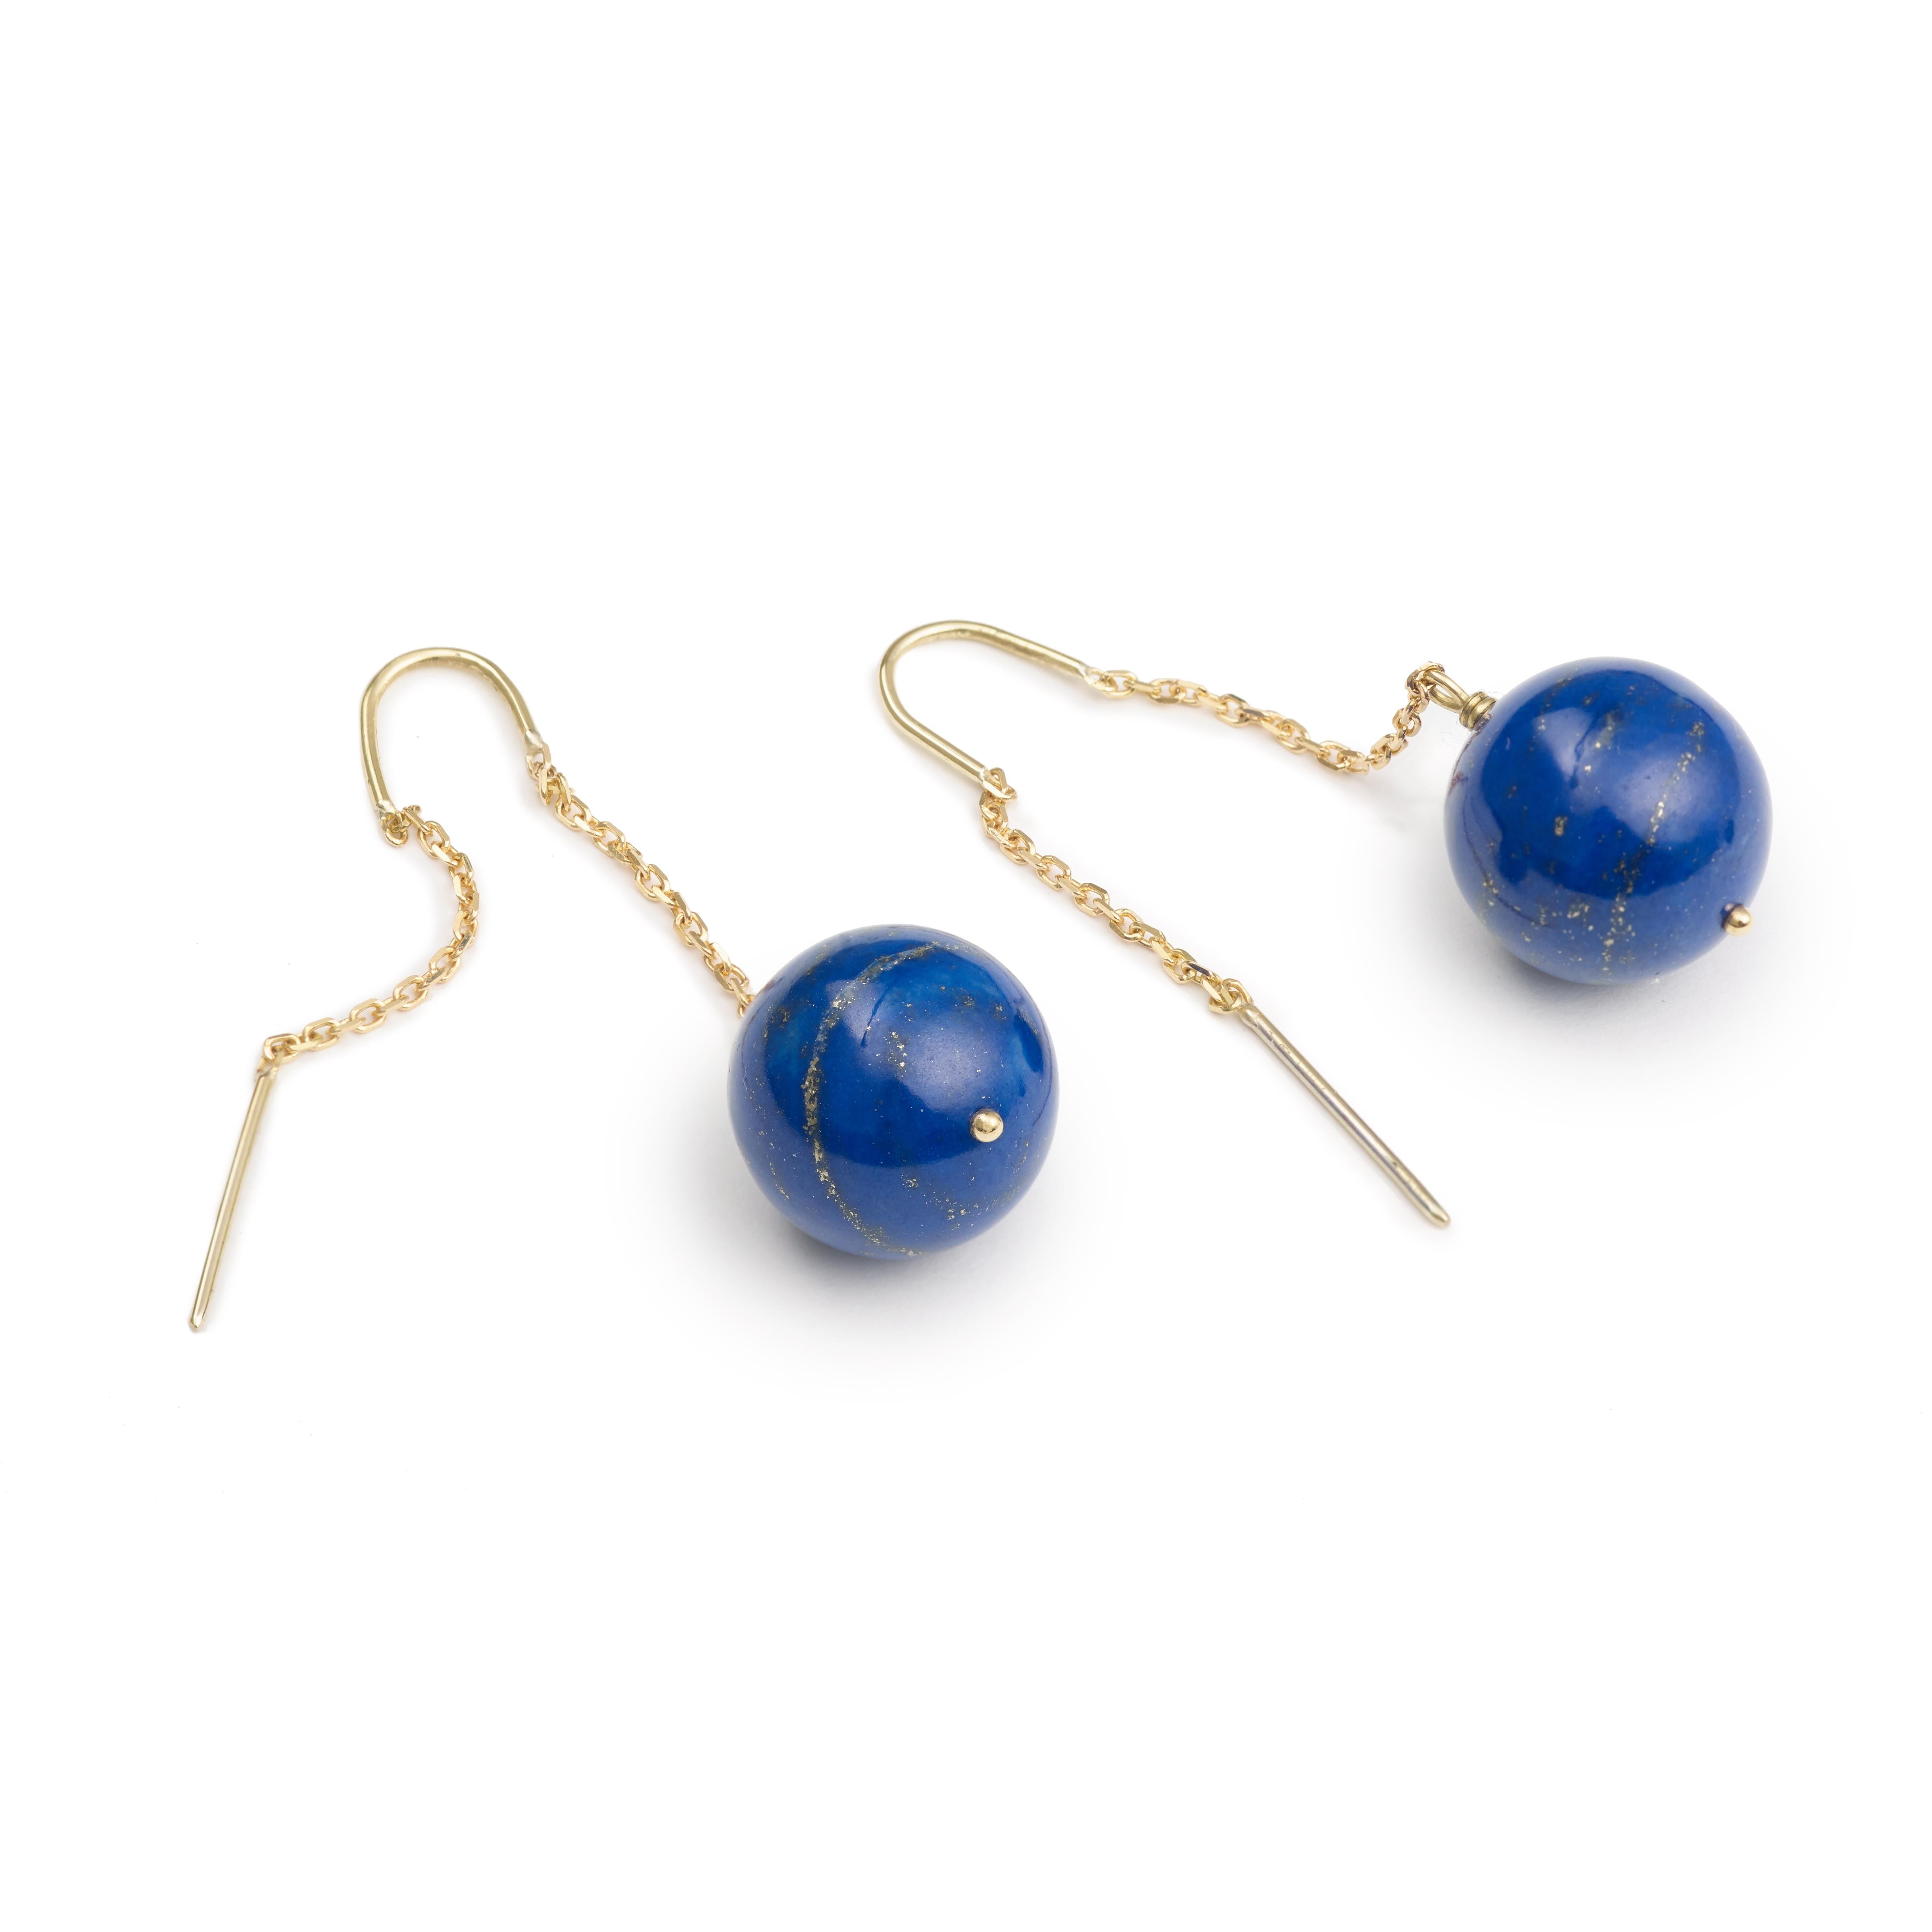 Lovely pair of gold pendant earrings with a lapis-lazuli ball on each earring.

Dimensions of the lapis-lazuli balls: 13 x 13 mm (0.51 x 0.51 inch)

Total weight of the earrings: 10.1 g

18 karat yellow gold, 750/1000ths

We can make these earrings